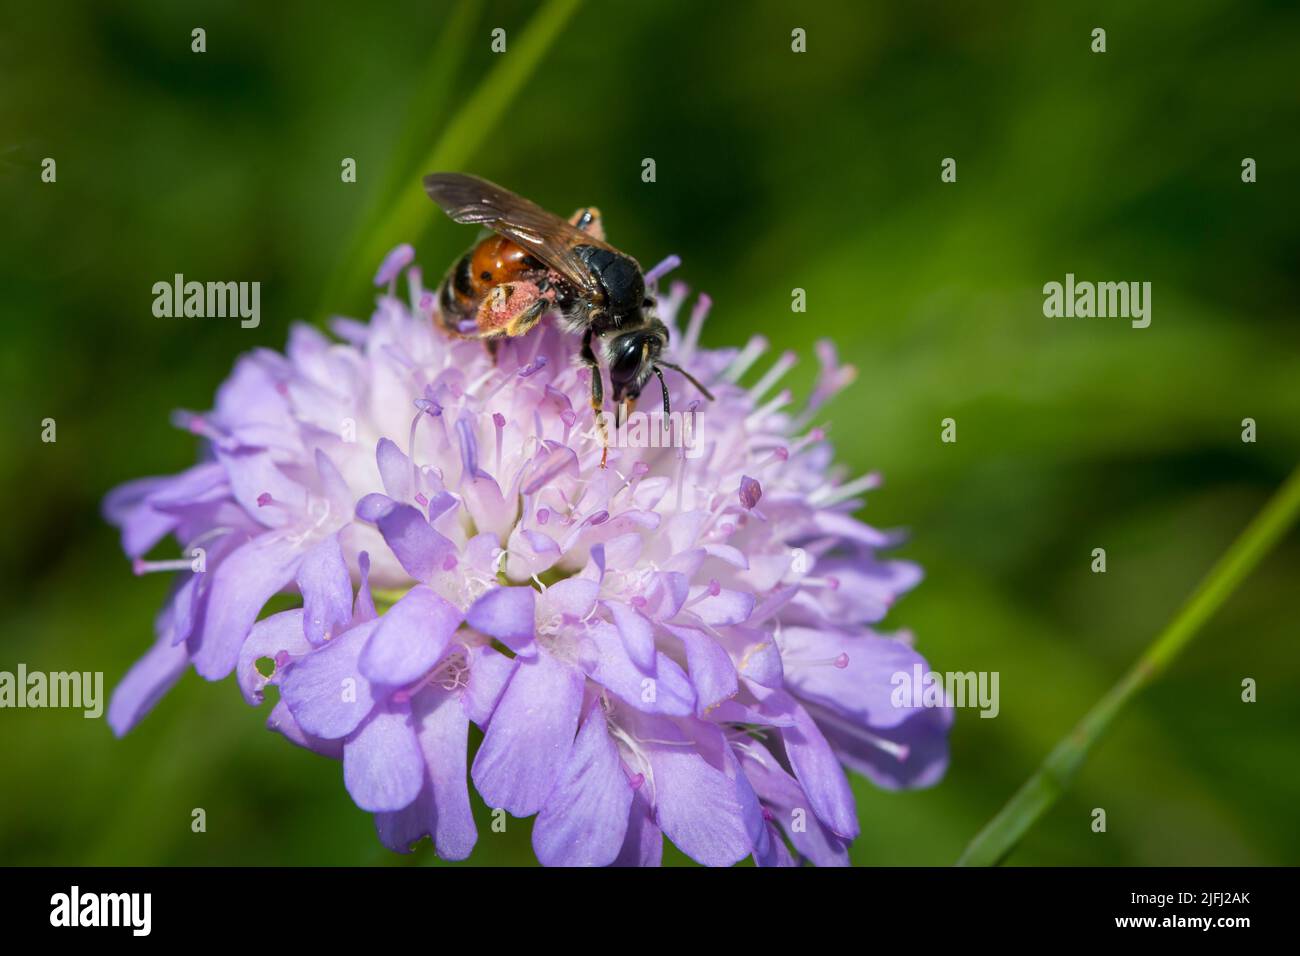 Insect feeding on a violet flower Stock Photo